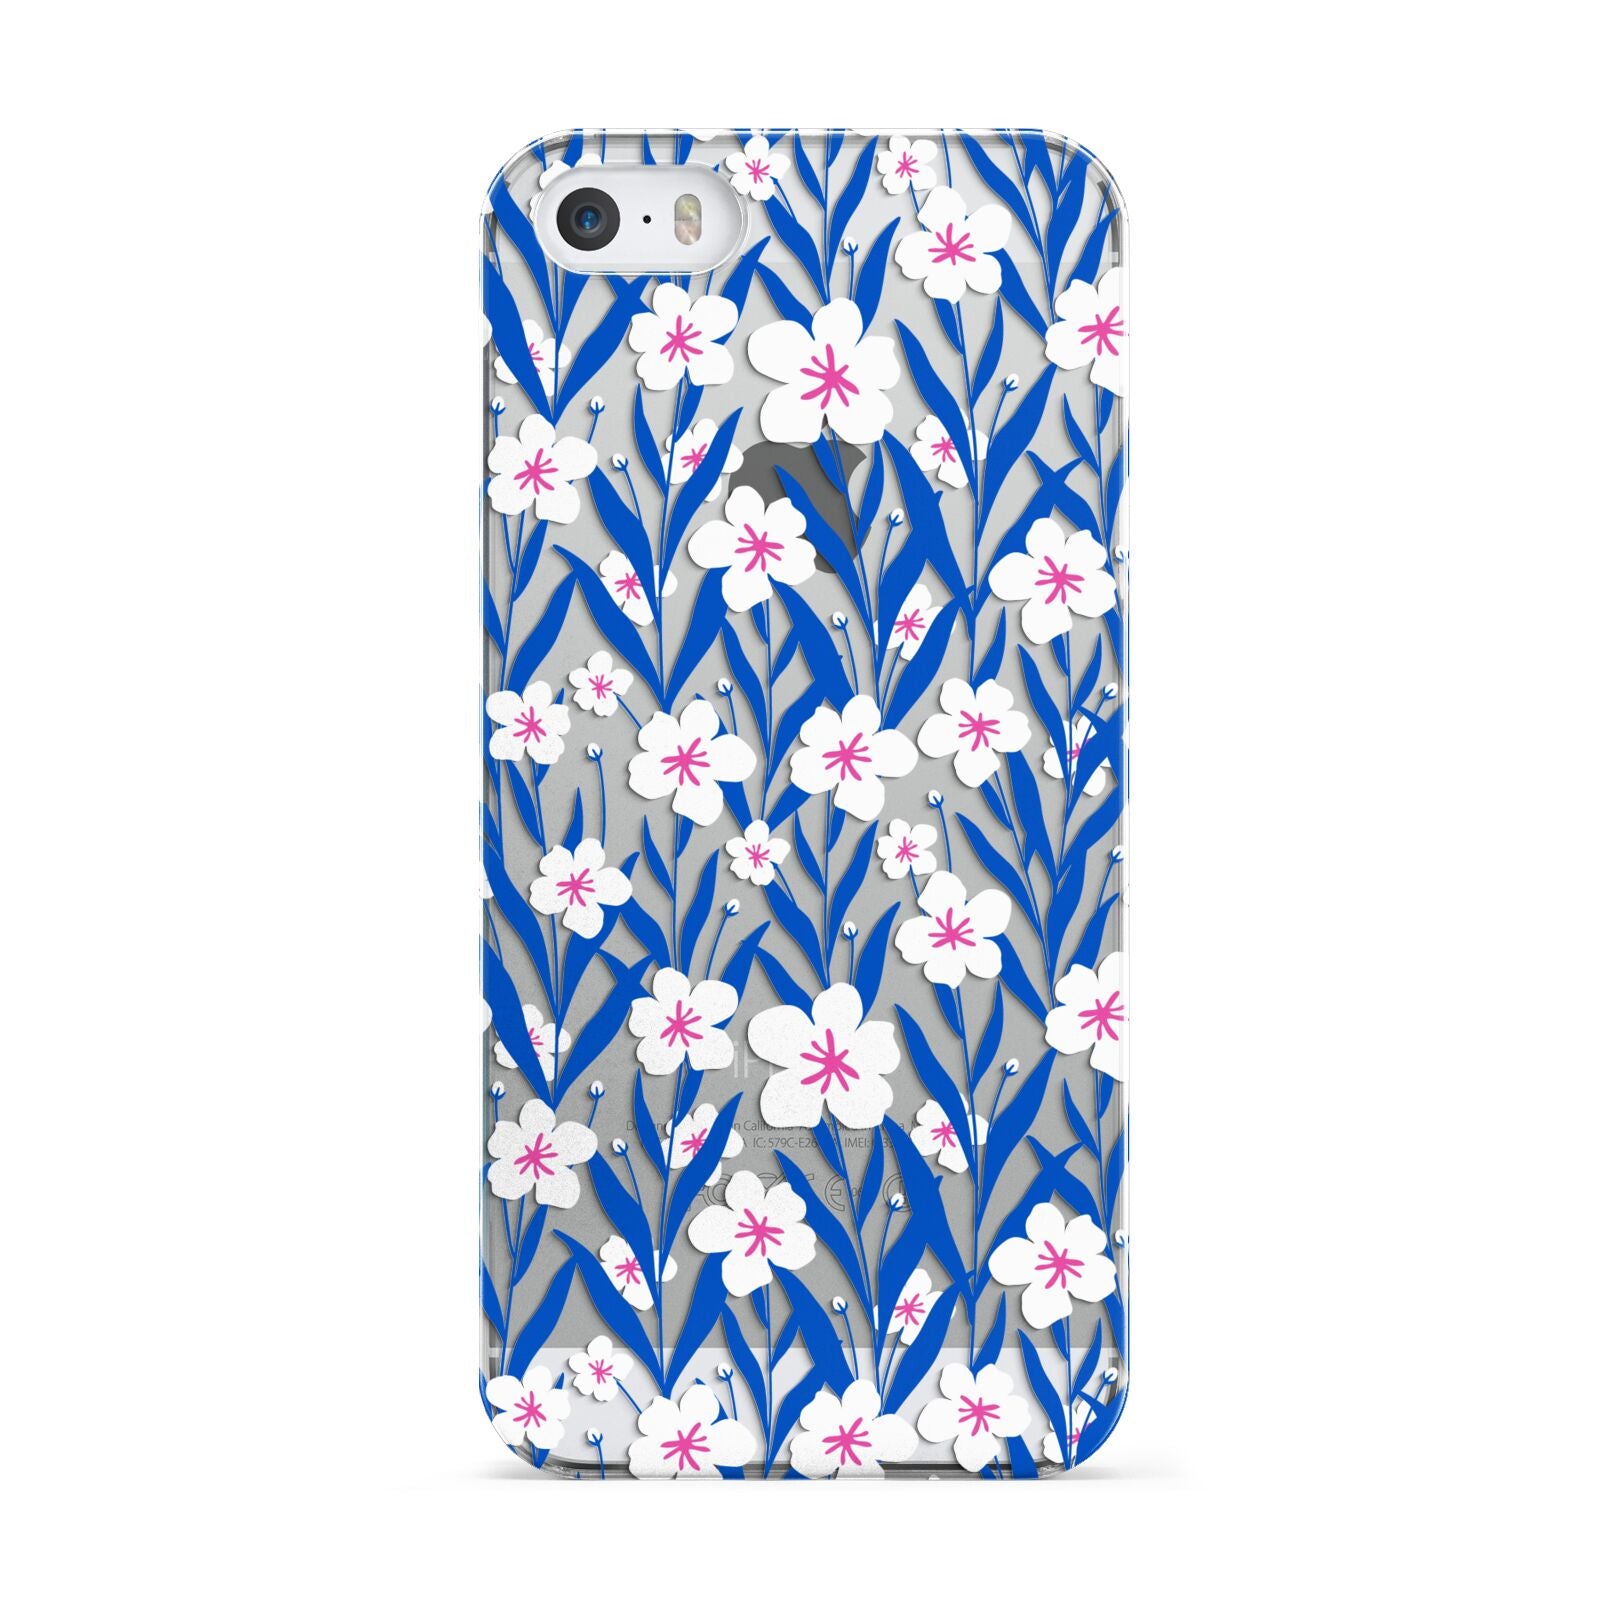 Blue and White Flowers Apple iPhone 5 Case